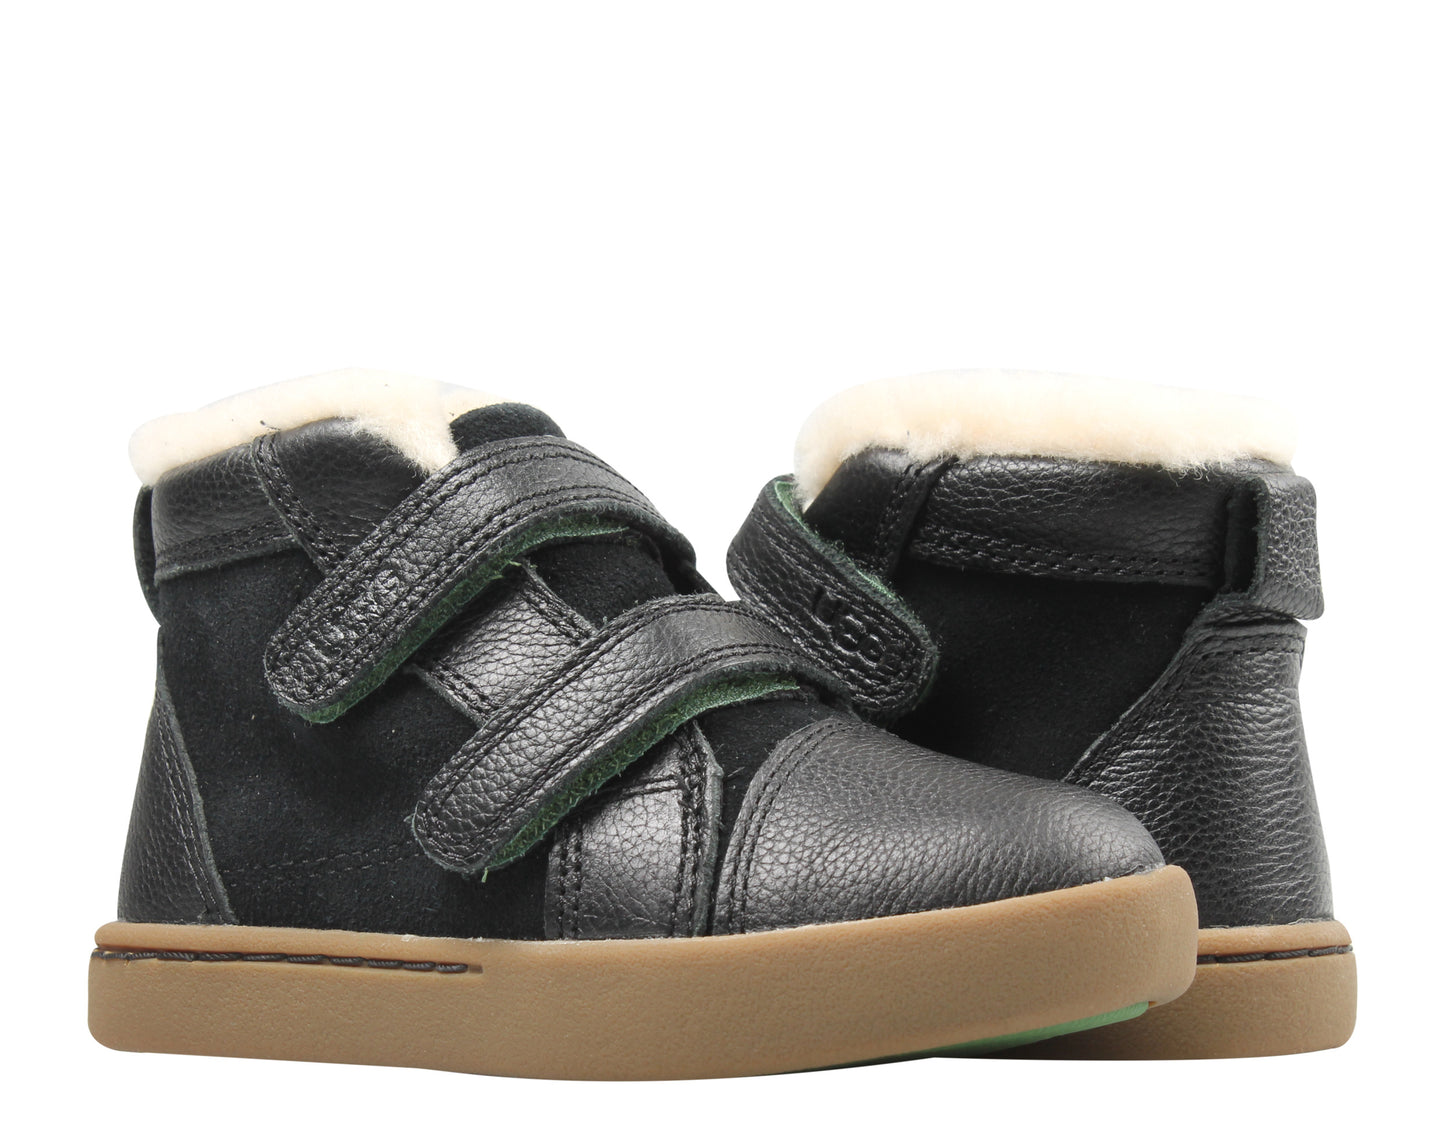 UGG Australia Rennon Toddlers Boots